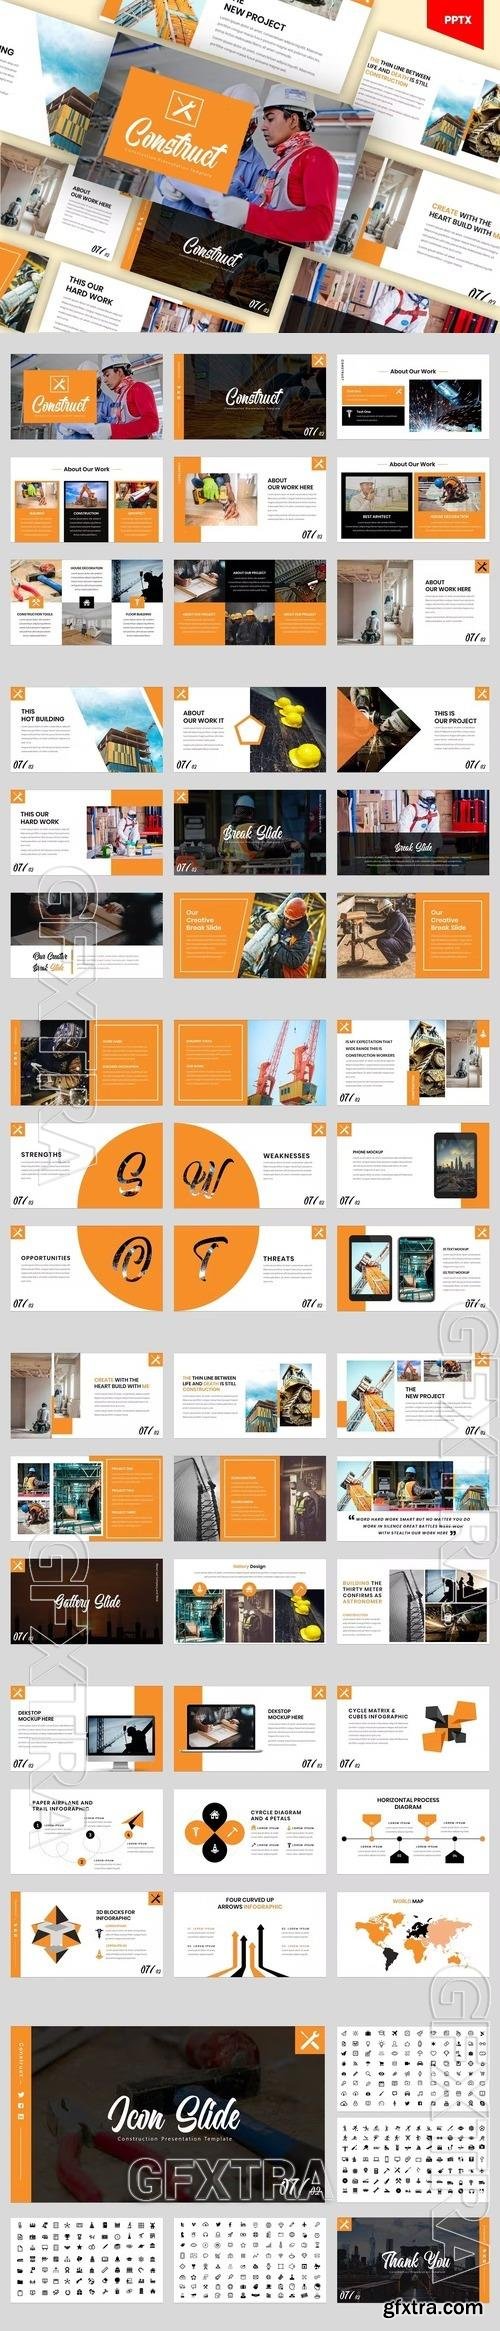 Construction & Building PowerPoint Template ZN7HXW8